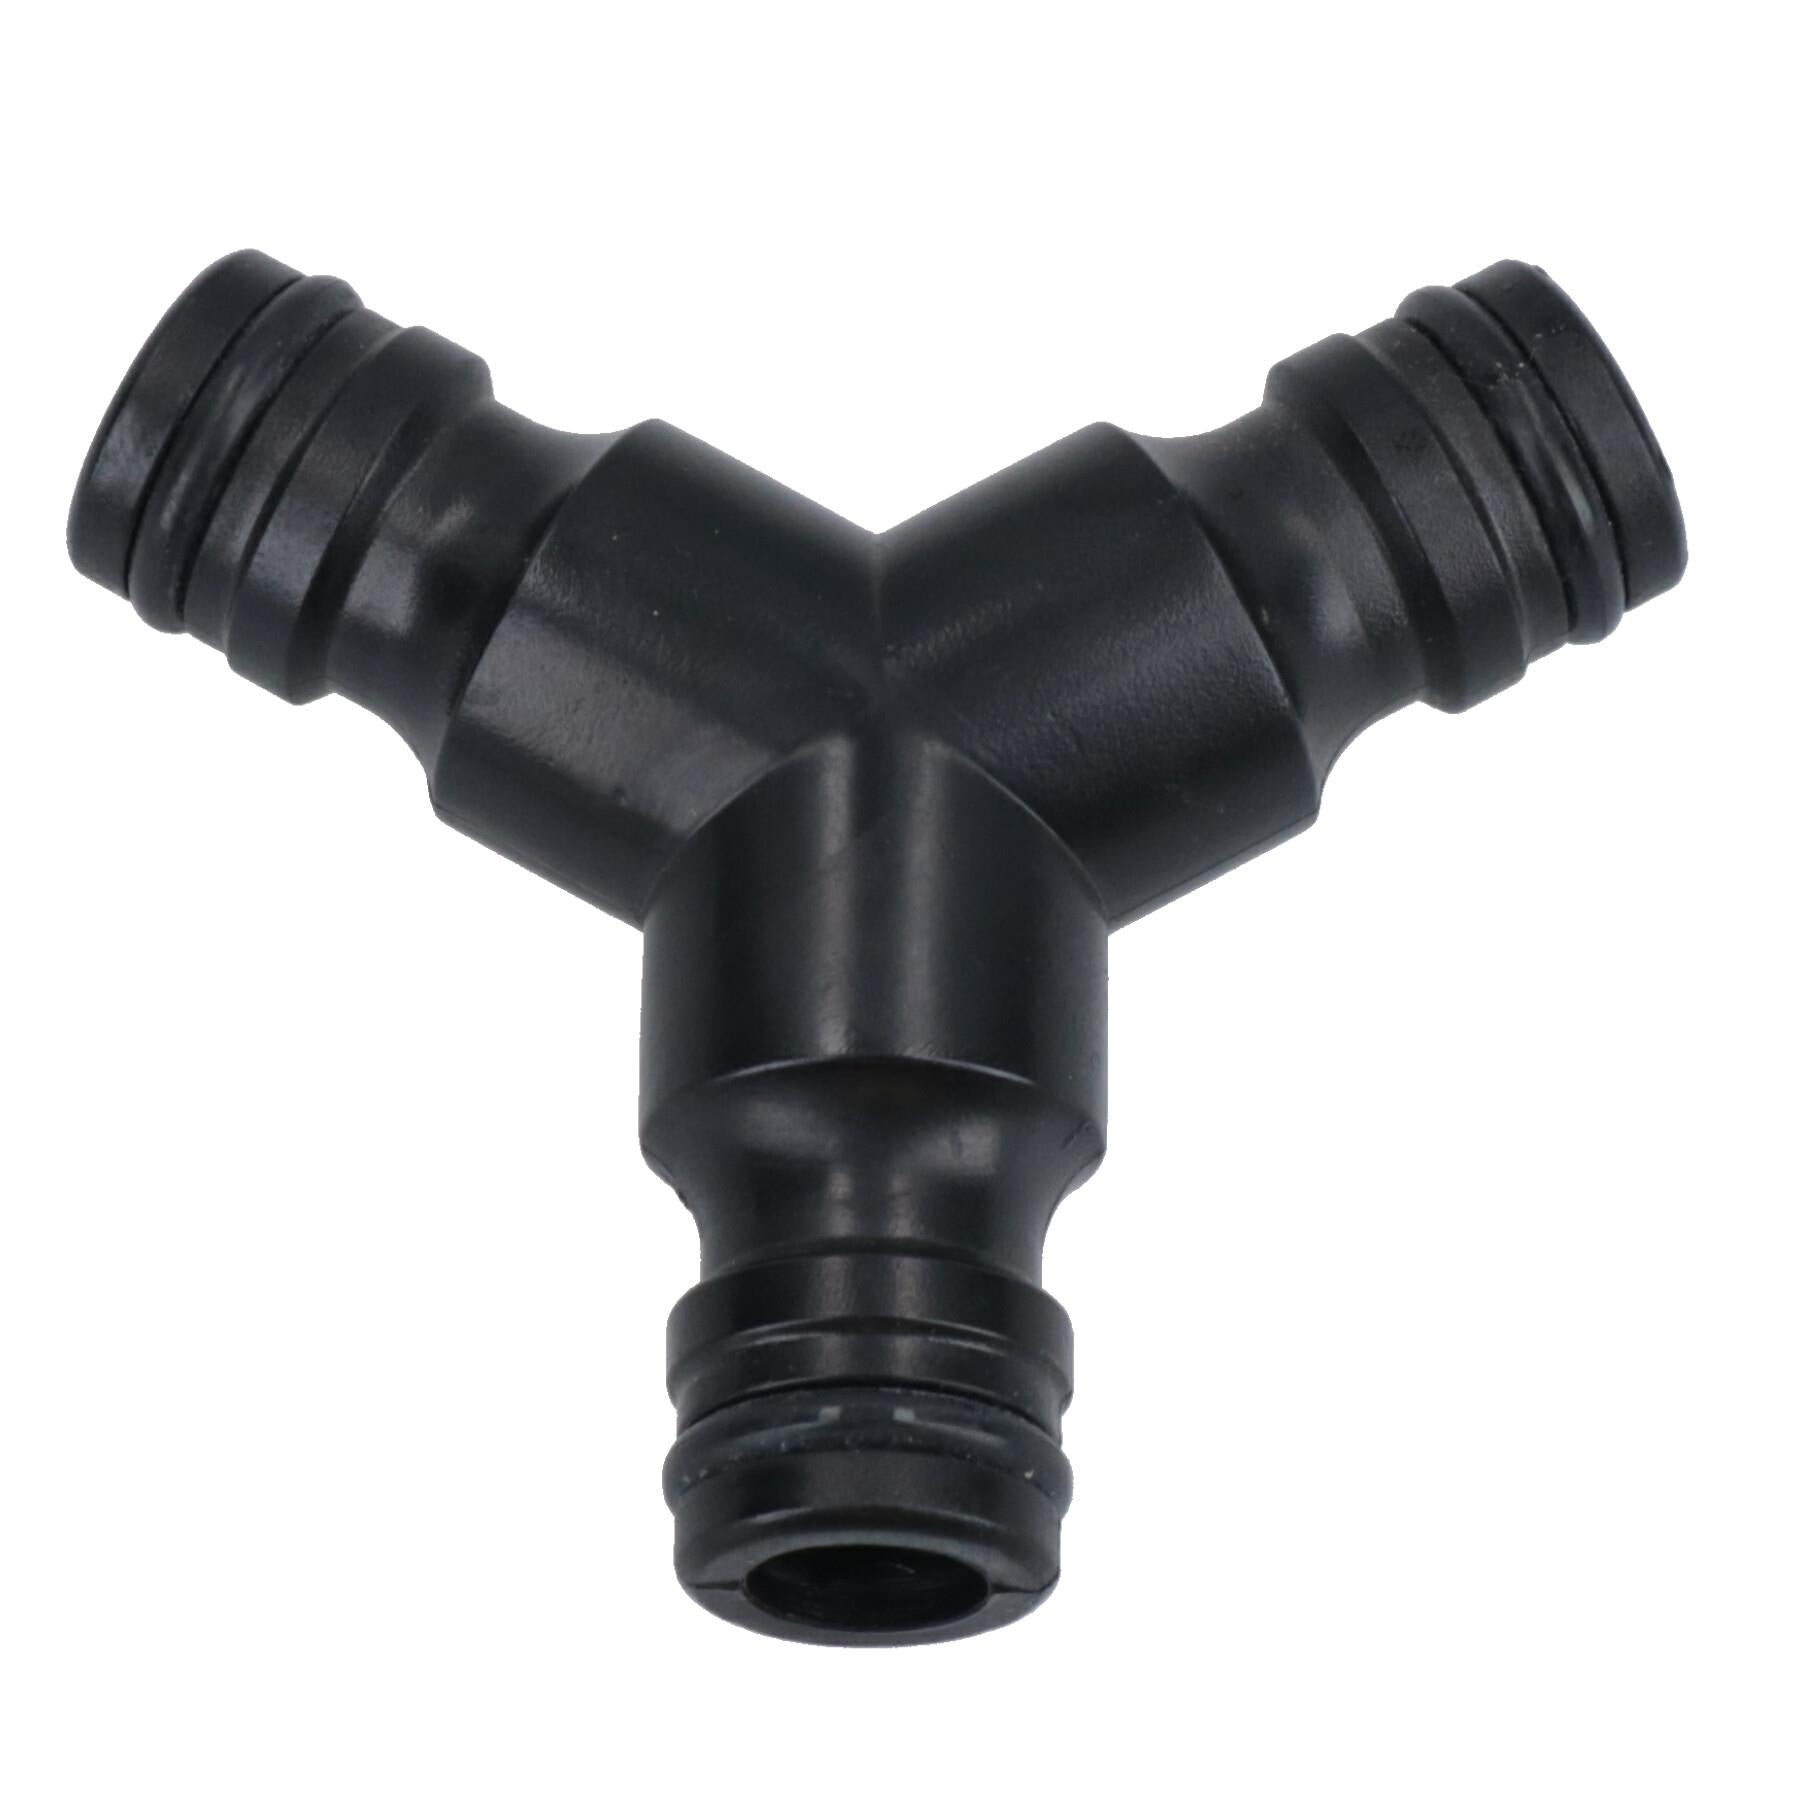 3 Way Garden Hose Pipe Coupler Connector Joiner Watering Water Pipes